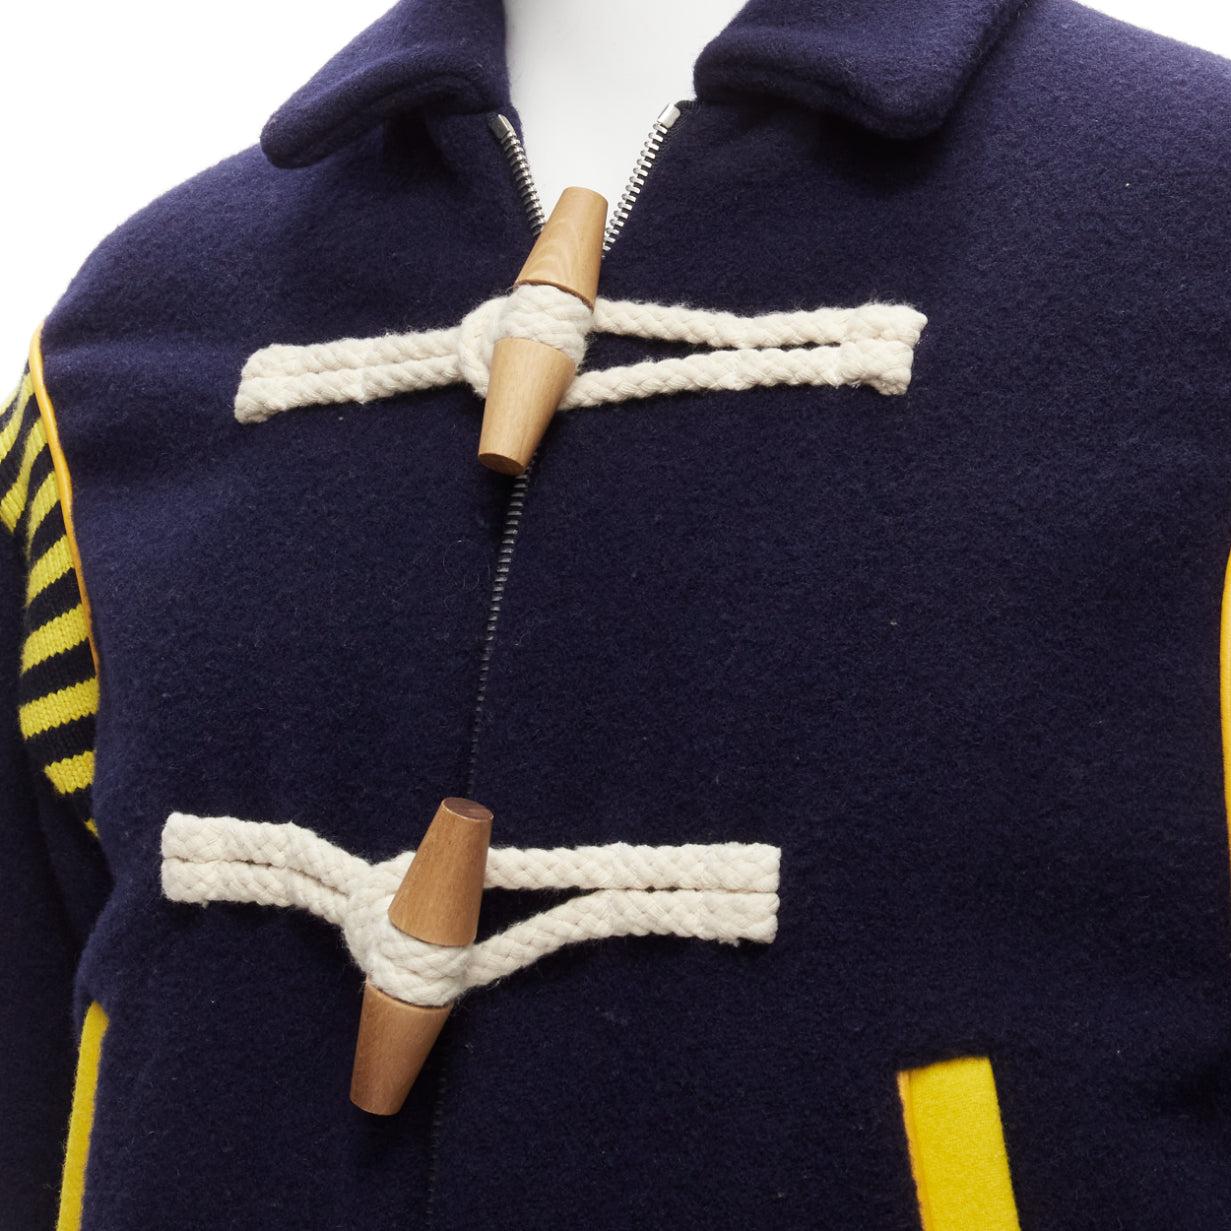 JW ANDERSON 100% virgin wool navy yellow accent rib shoulder toggle button bomber IT48 M
Reference: JSLE/A00008
Brand: JW Anderson
Designer: JW Anderson
Material: Virgin Wool
Color: Navy, Yellow
Pattern: Solid
Closure: Button
Lining: Navy